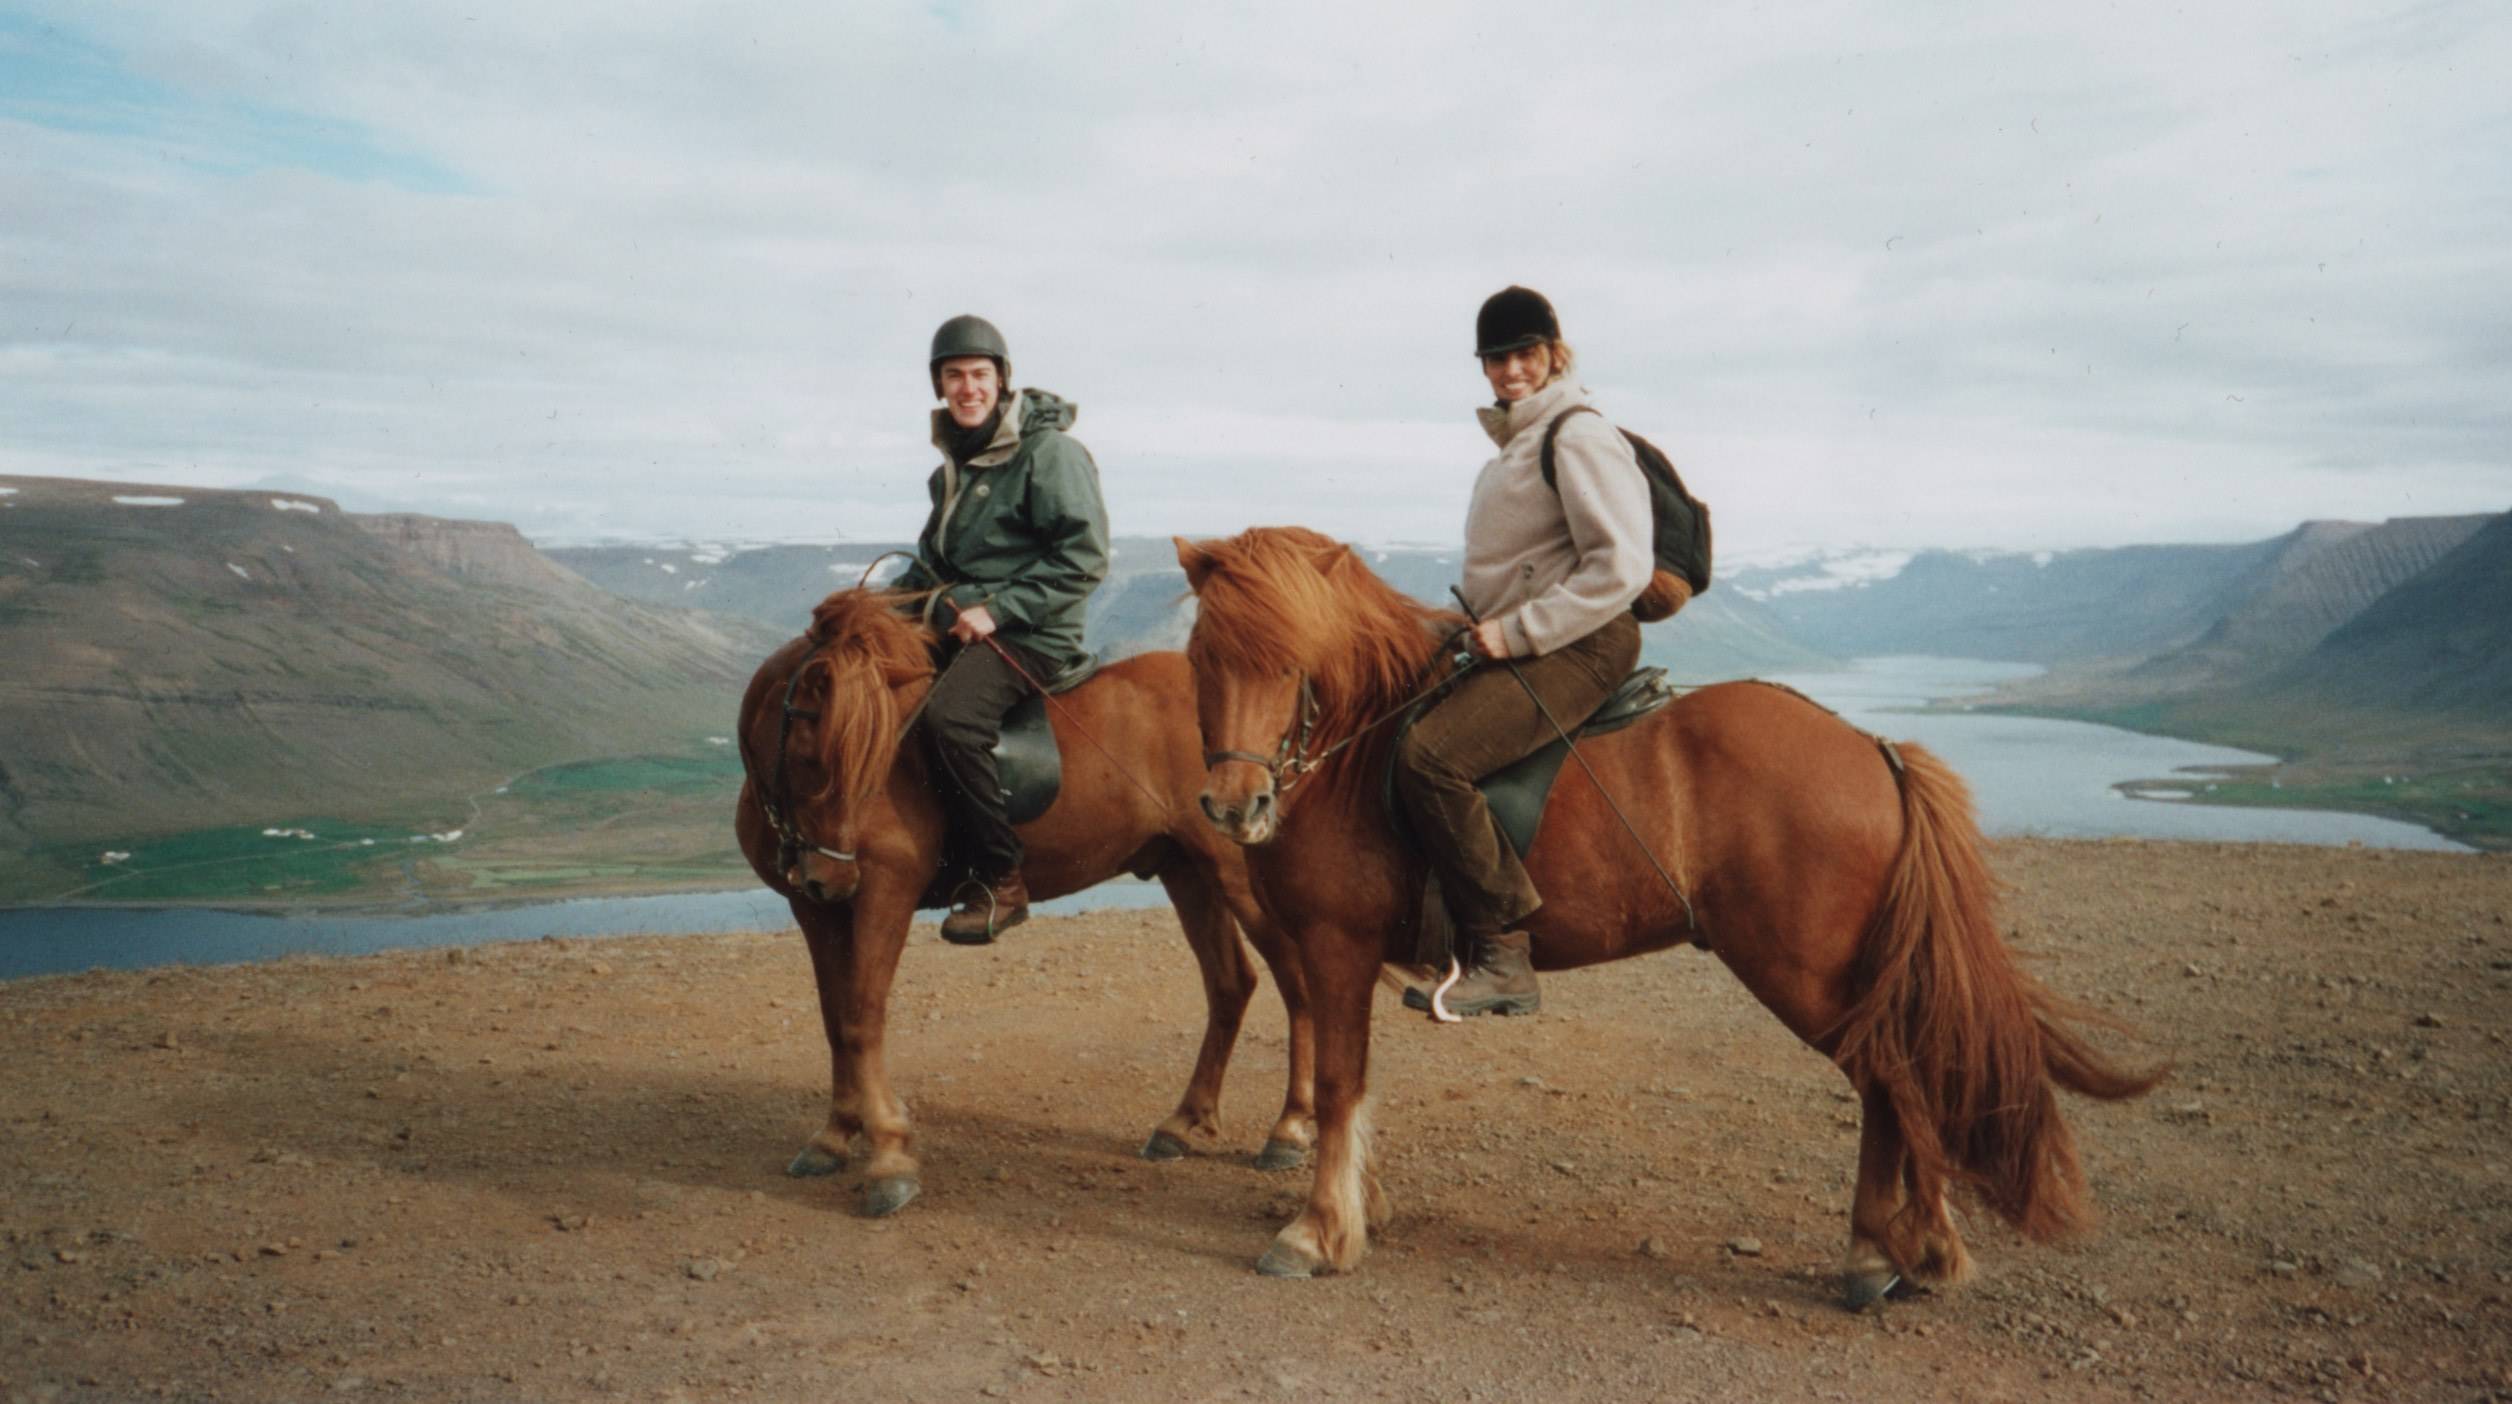 Icelandic horses, tiny but strong